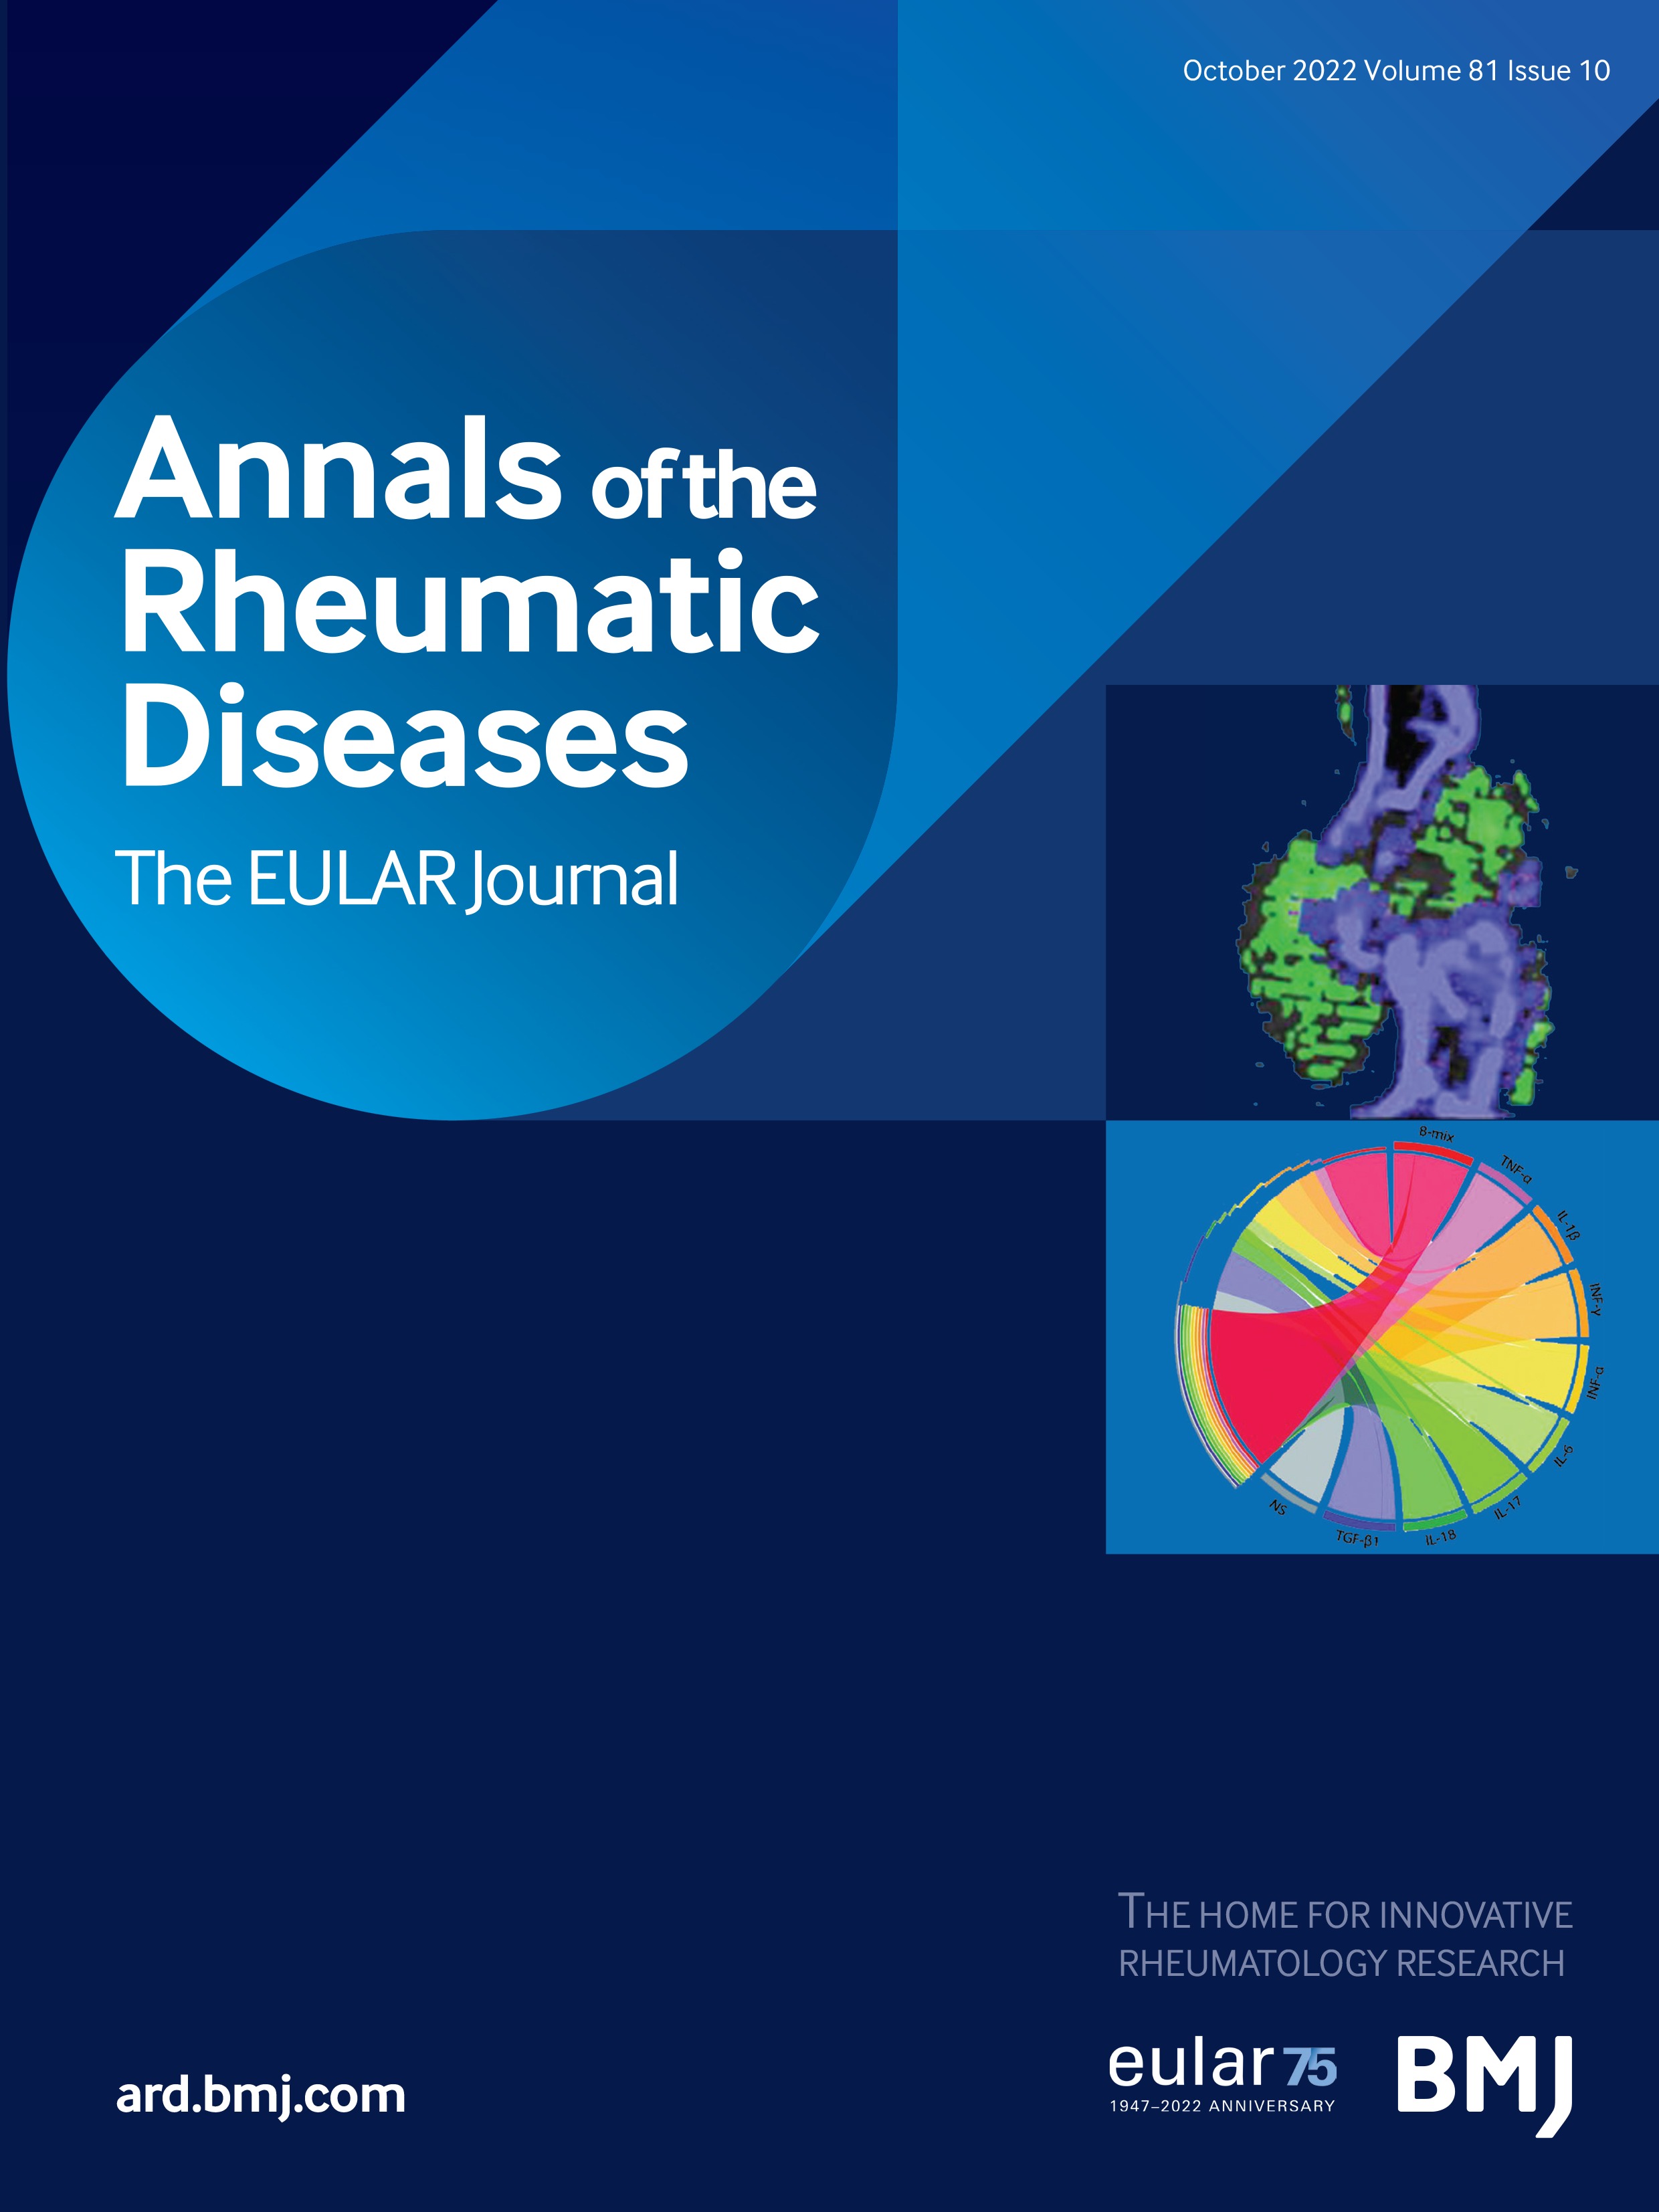 Assessing acceptability and identifying barriers and facilitators to implementation of the EULAR recommendations for patient education in inflammatory arthritis: a mixed-methods study with rheumatology professionals in 23 European and Asian countries